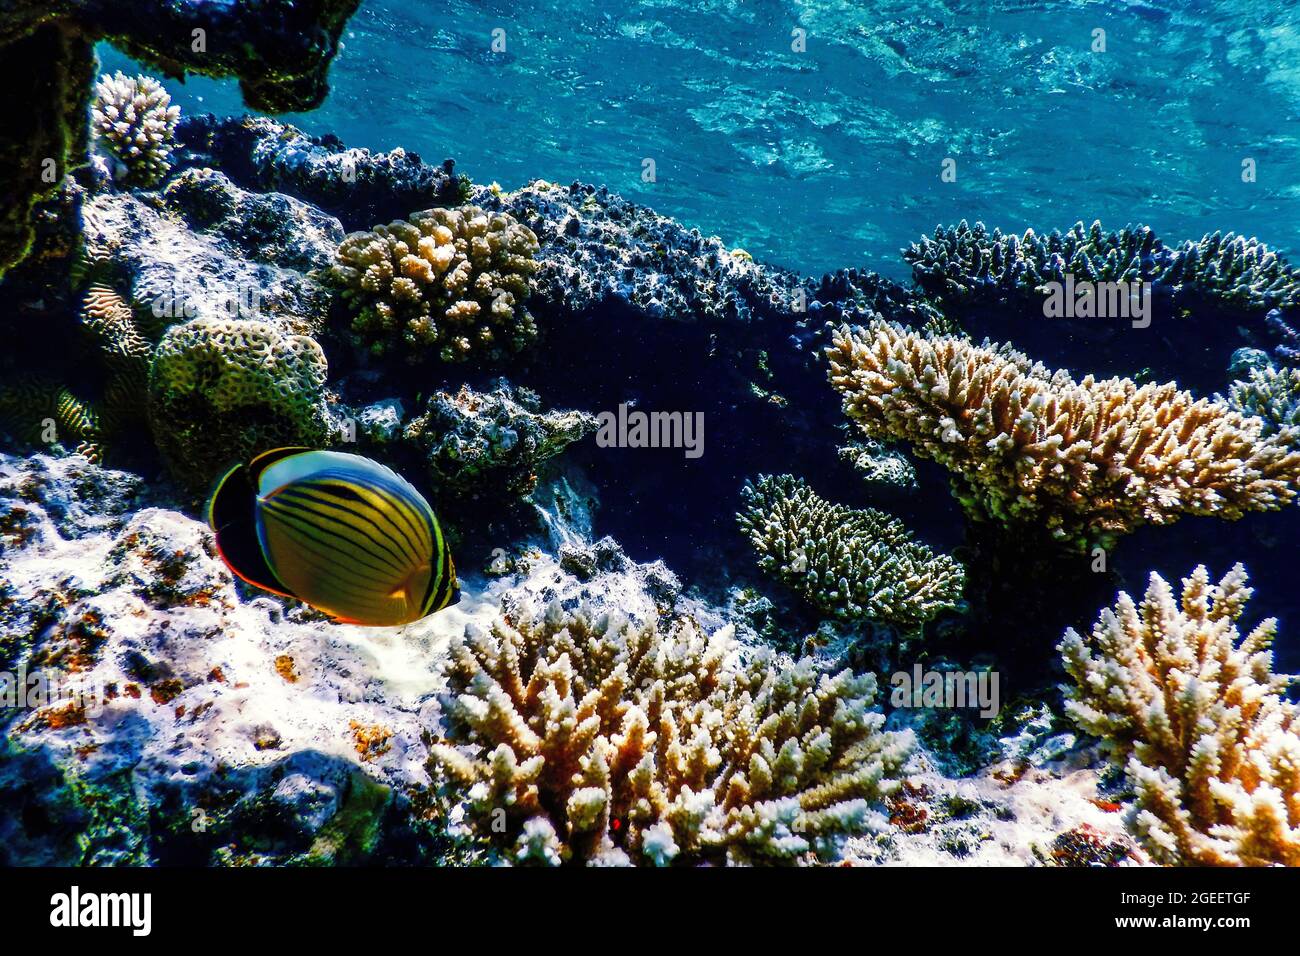 Black tailed butterflyfish (Chaetodon austriacus) Polyp butterflyfish, Coral fish, Tropical waters, Marine life Stock Photo